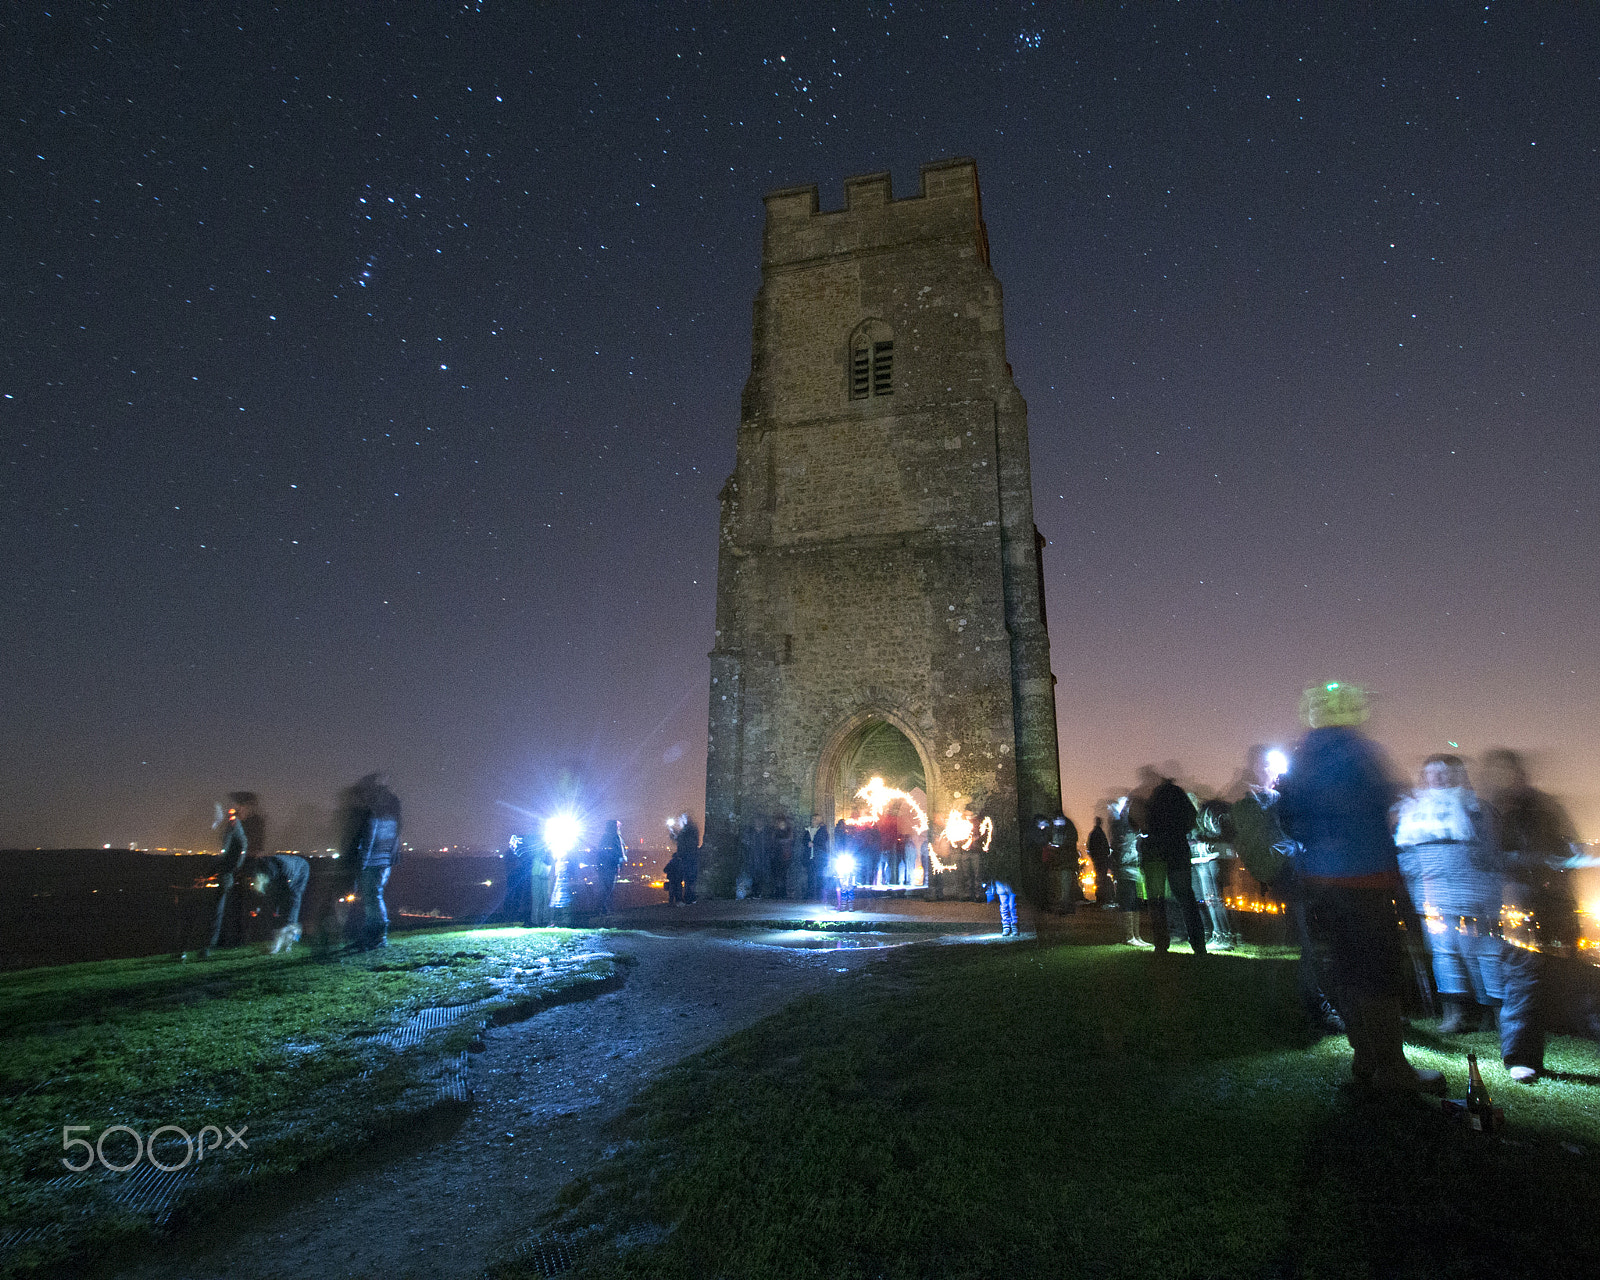 Nikon D800 + Tamron SP AF 10-24mm F3.5-4.5 Di II LD Aspherical (IF) sample photo. New years at glastonbury tor photography